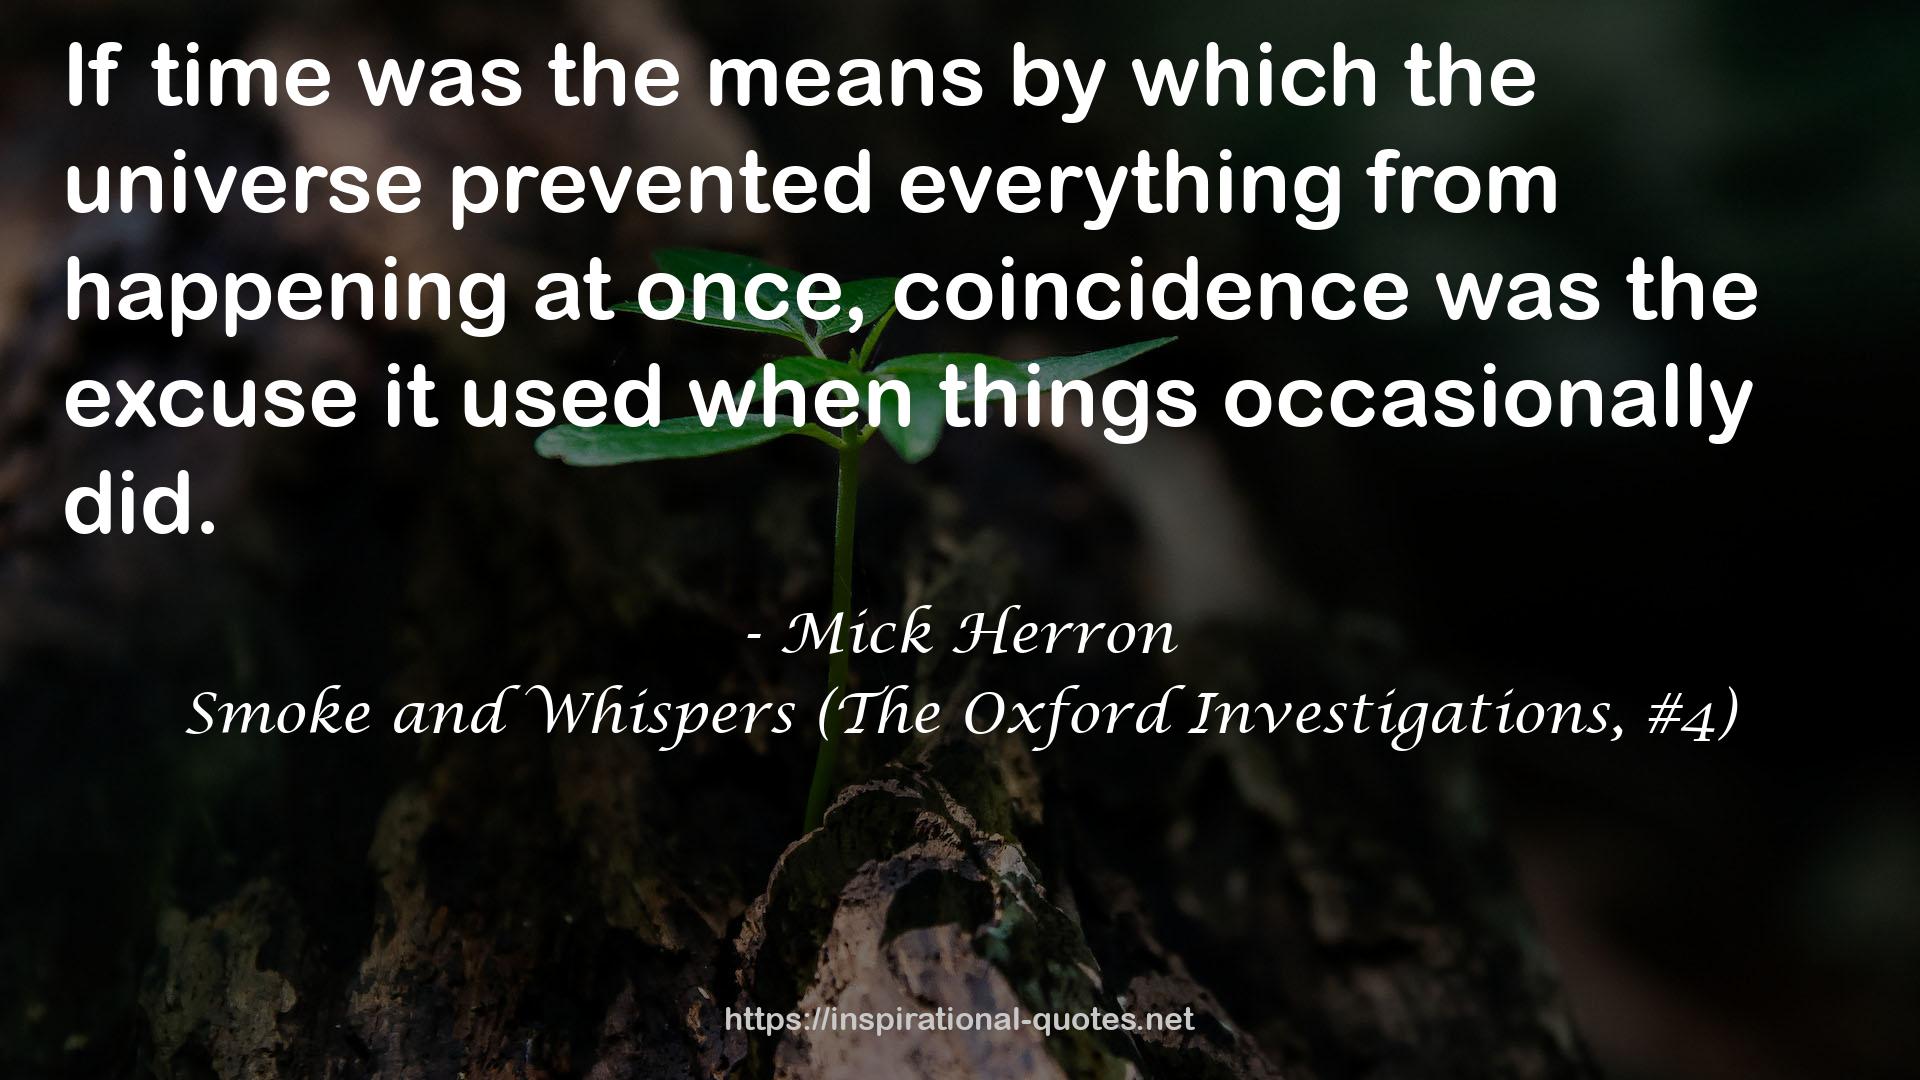 Smoke and Whispers (The Oxford Investigations, #4) QUOTES